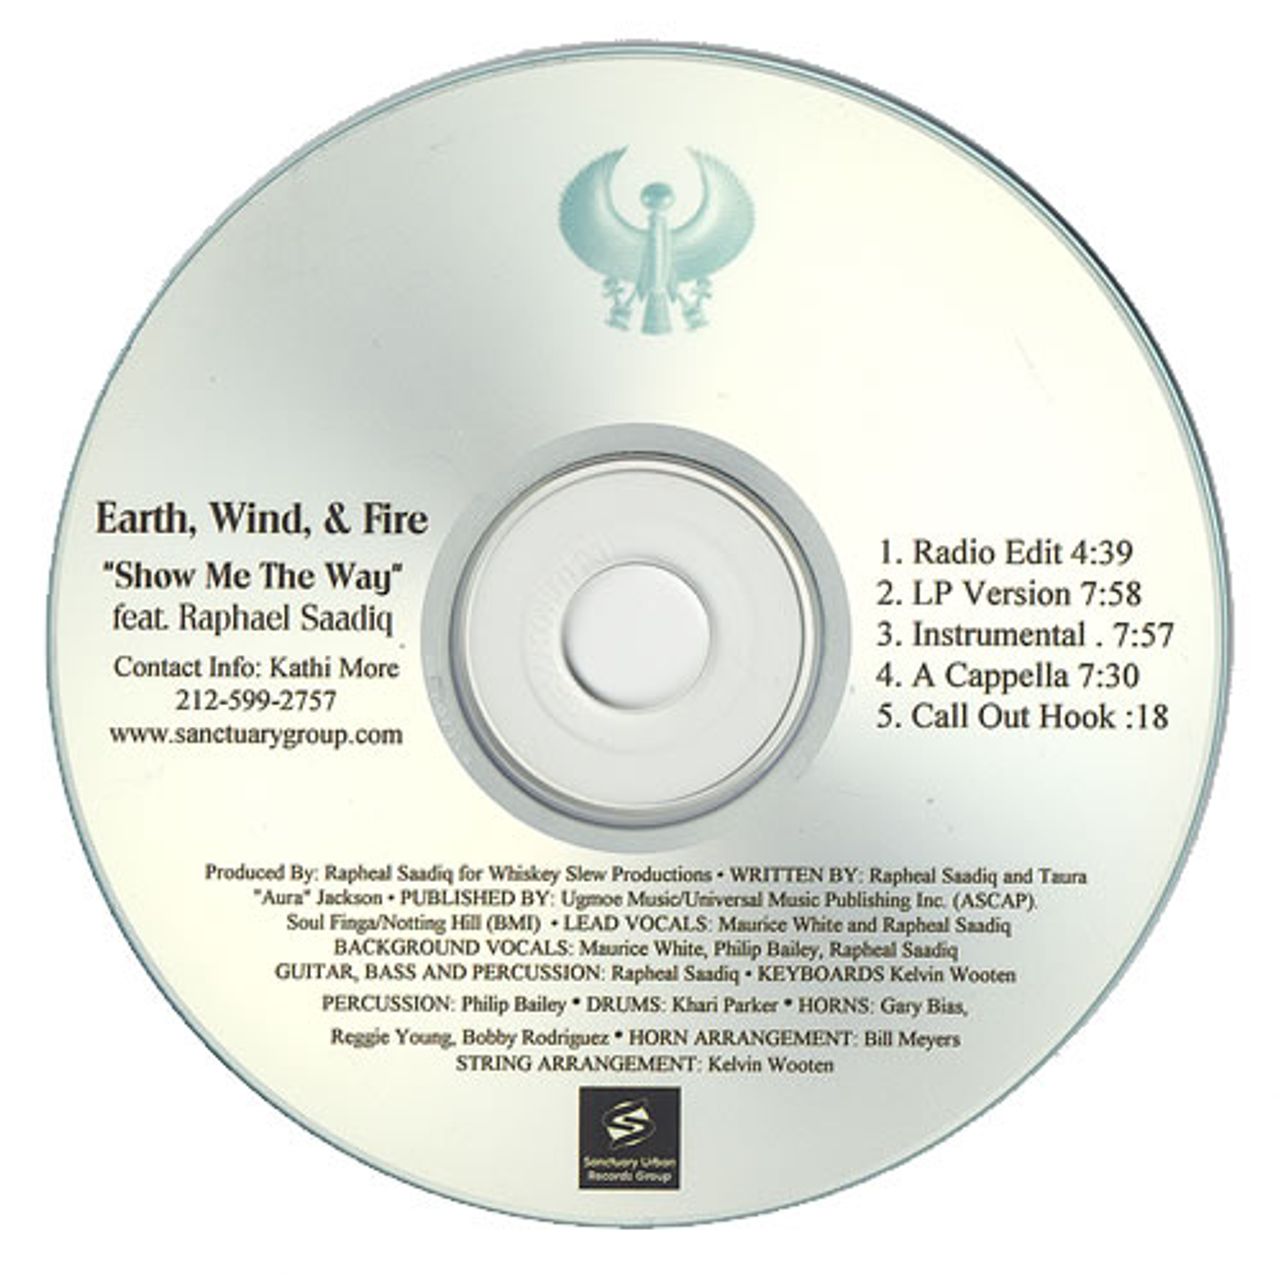 Earth Wind & Fire Show Me The Way US Promo CD-R acetate CDR-ACETATE